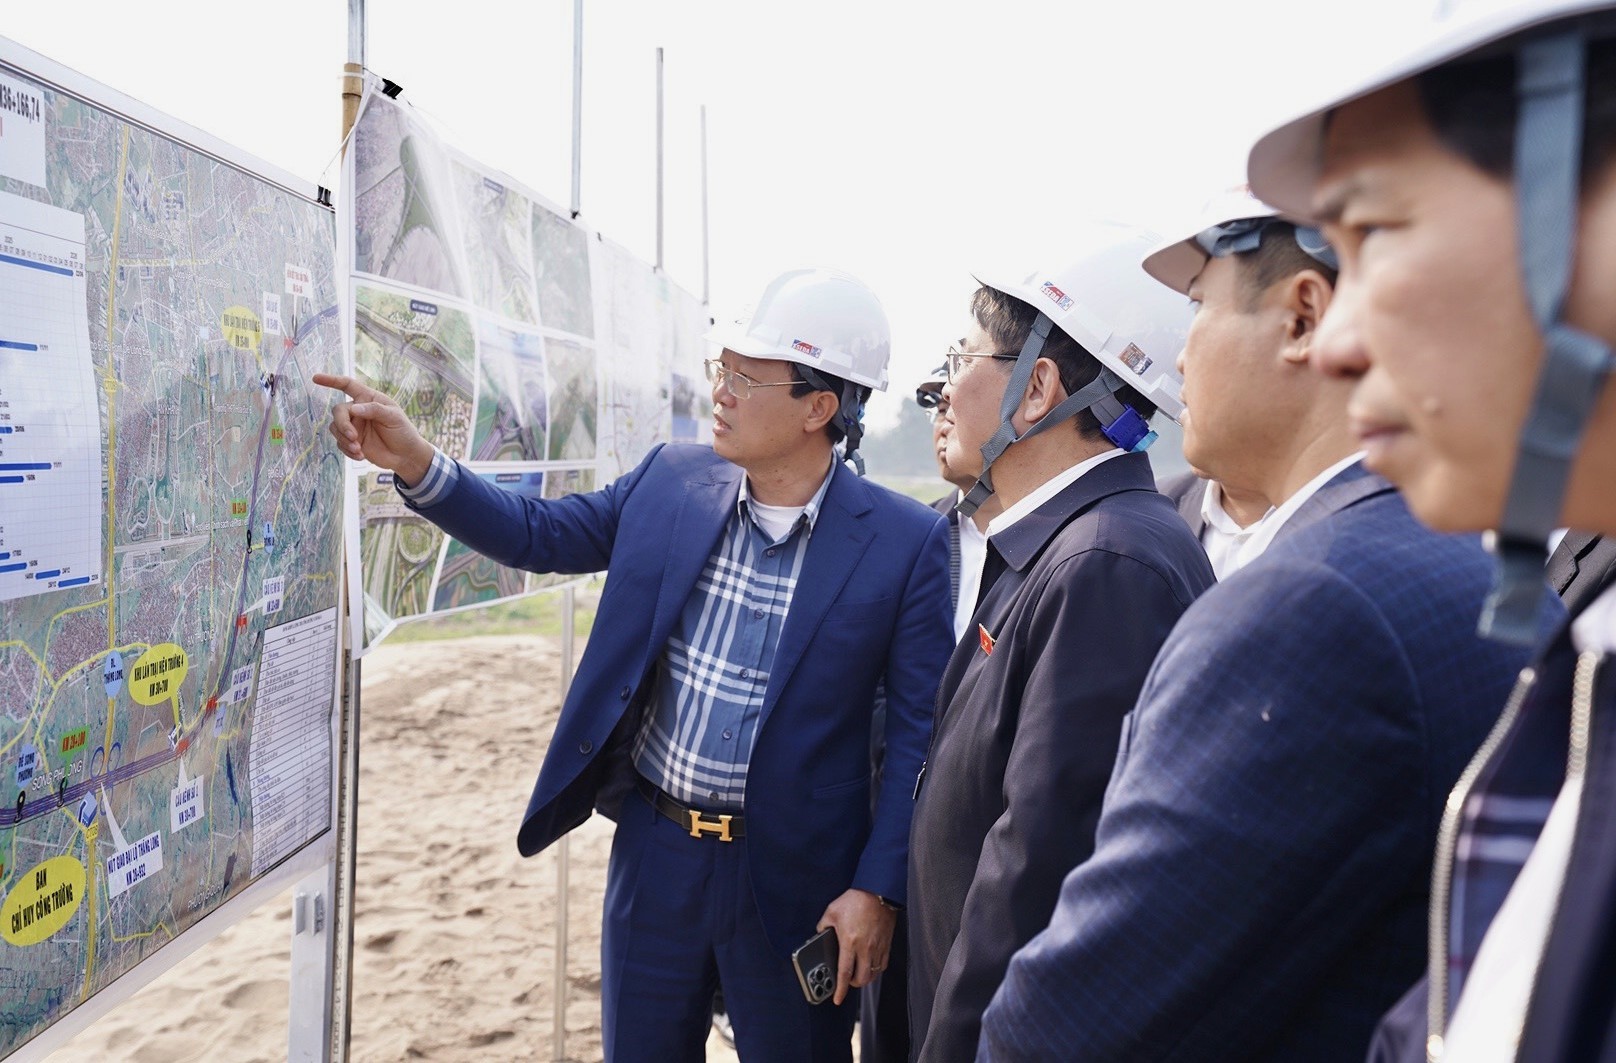 VICE CHAIRMAN OF THE NATIONAL ASSEMBLY NGUYEN DUC HAI INSPECTS THE CONSTRUCTION PROGRESS OF RING ROAD NO. 4 PROJECT - CAPITAL REGION